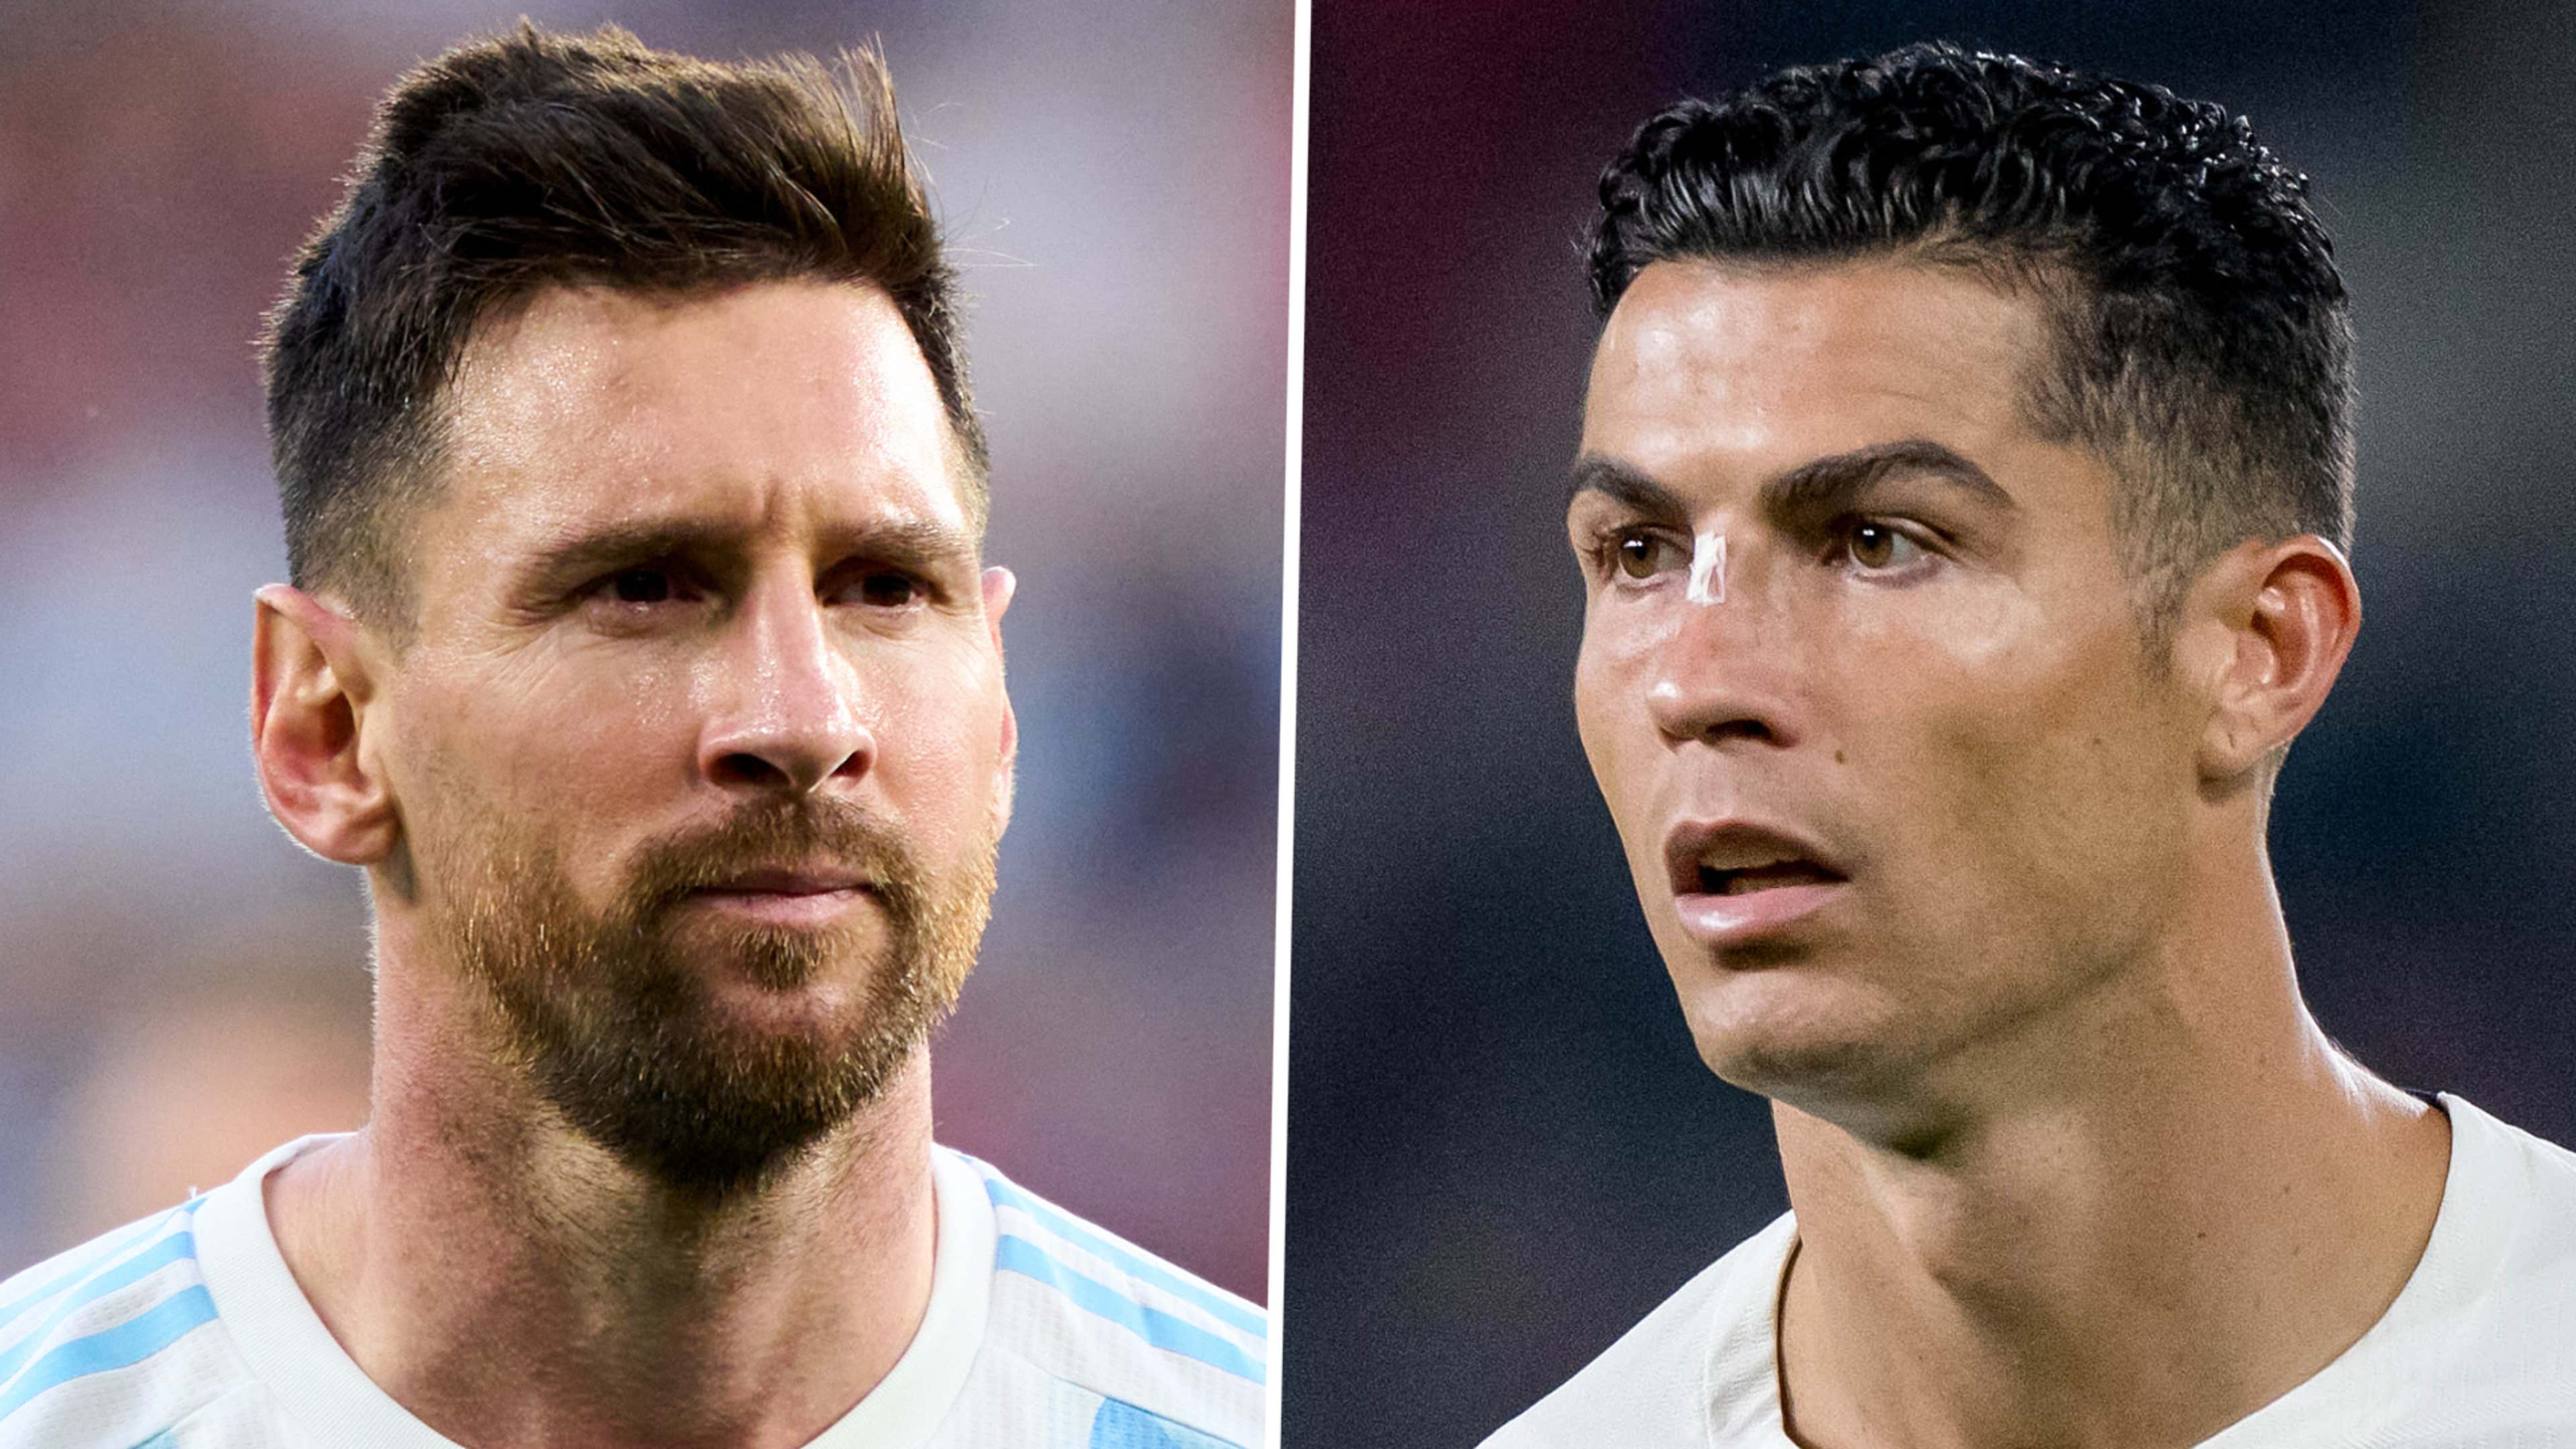 Check mate! Messi and Ronaldo square up in chess picture ahead of